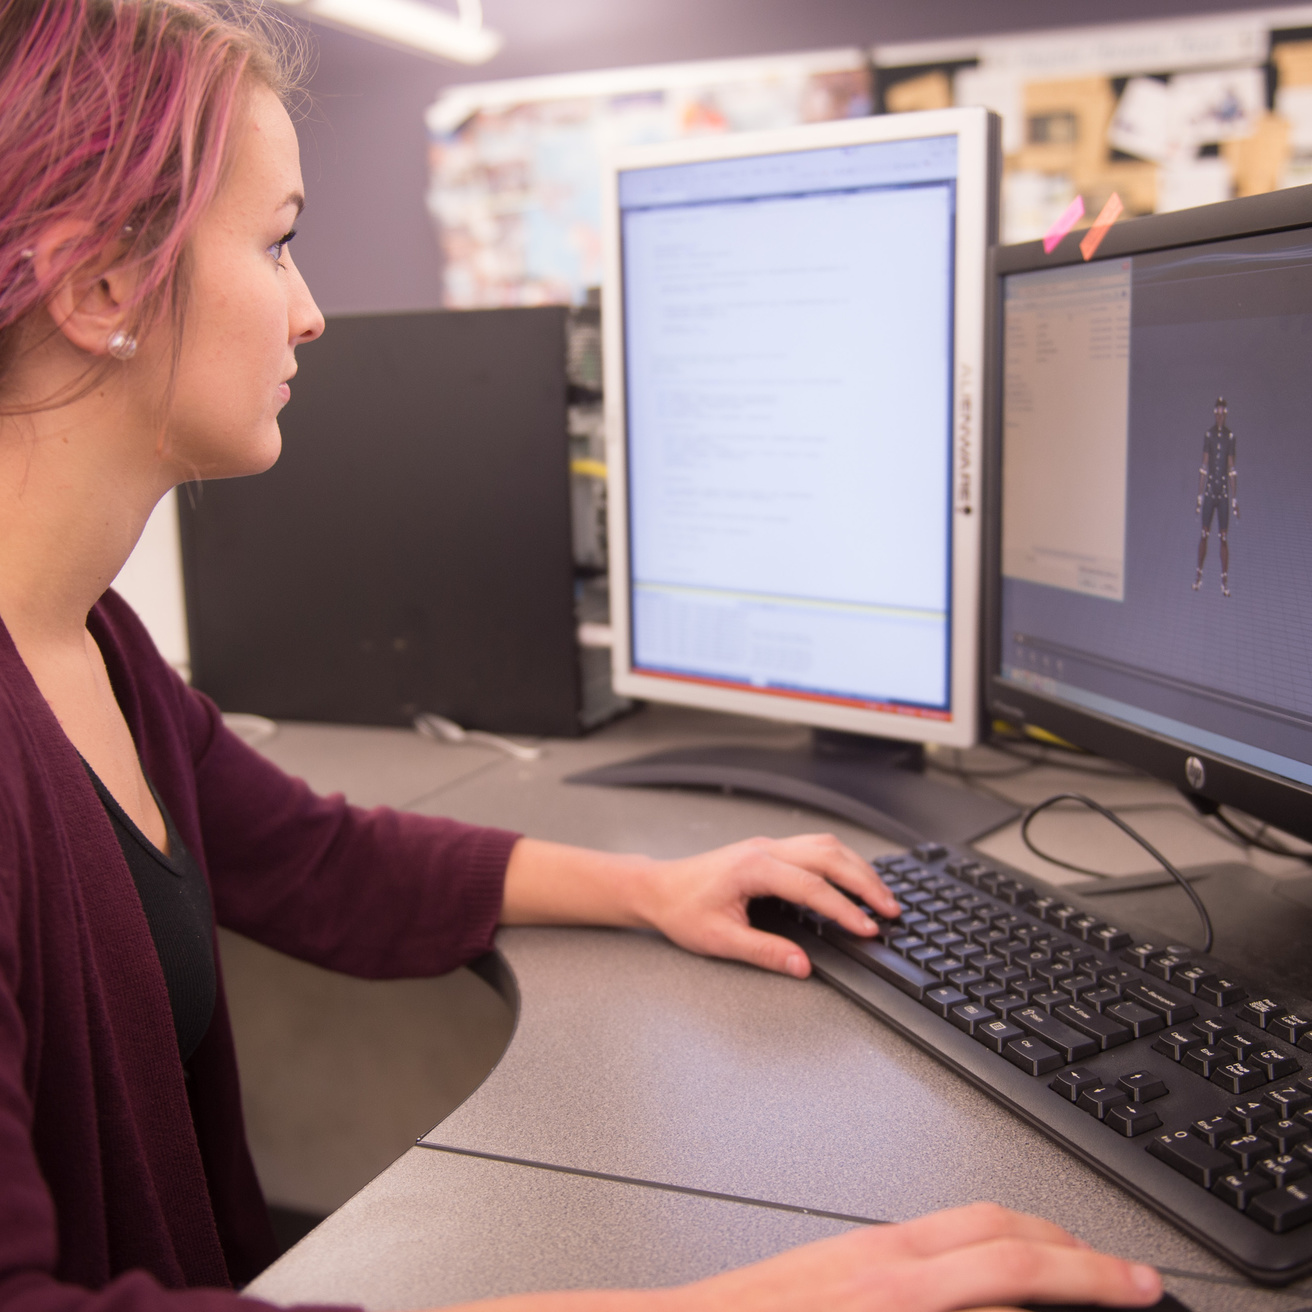 Female student using desktop computer and there is a virtual man on the screen